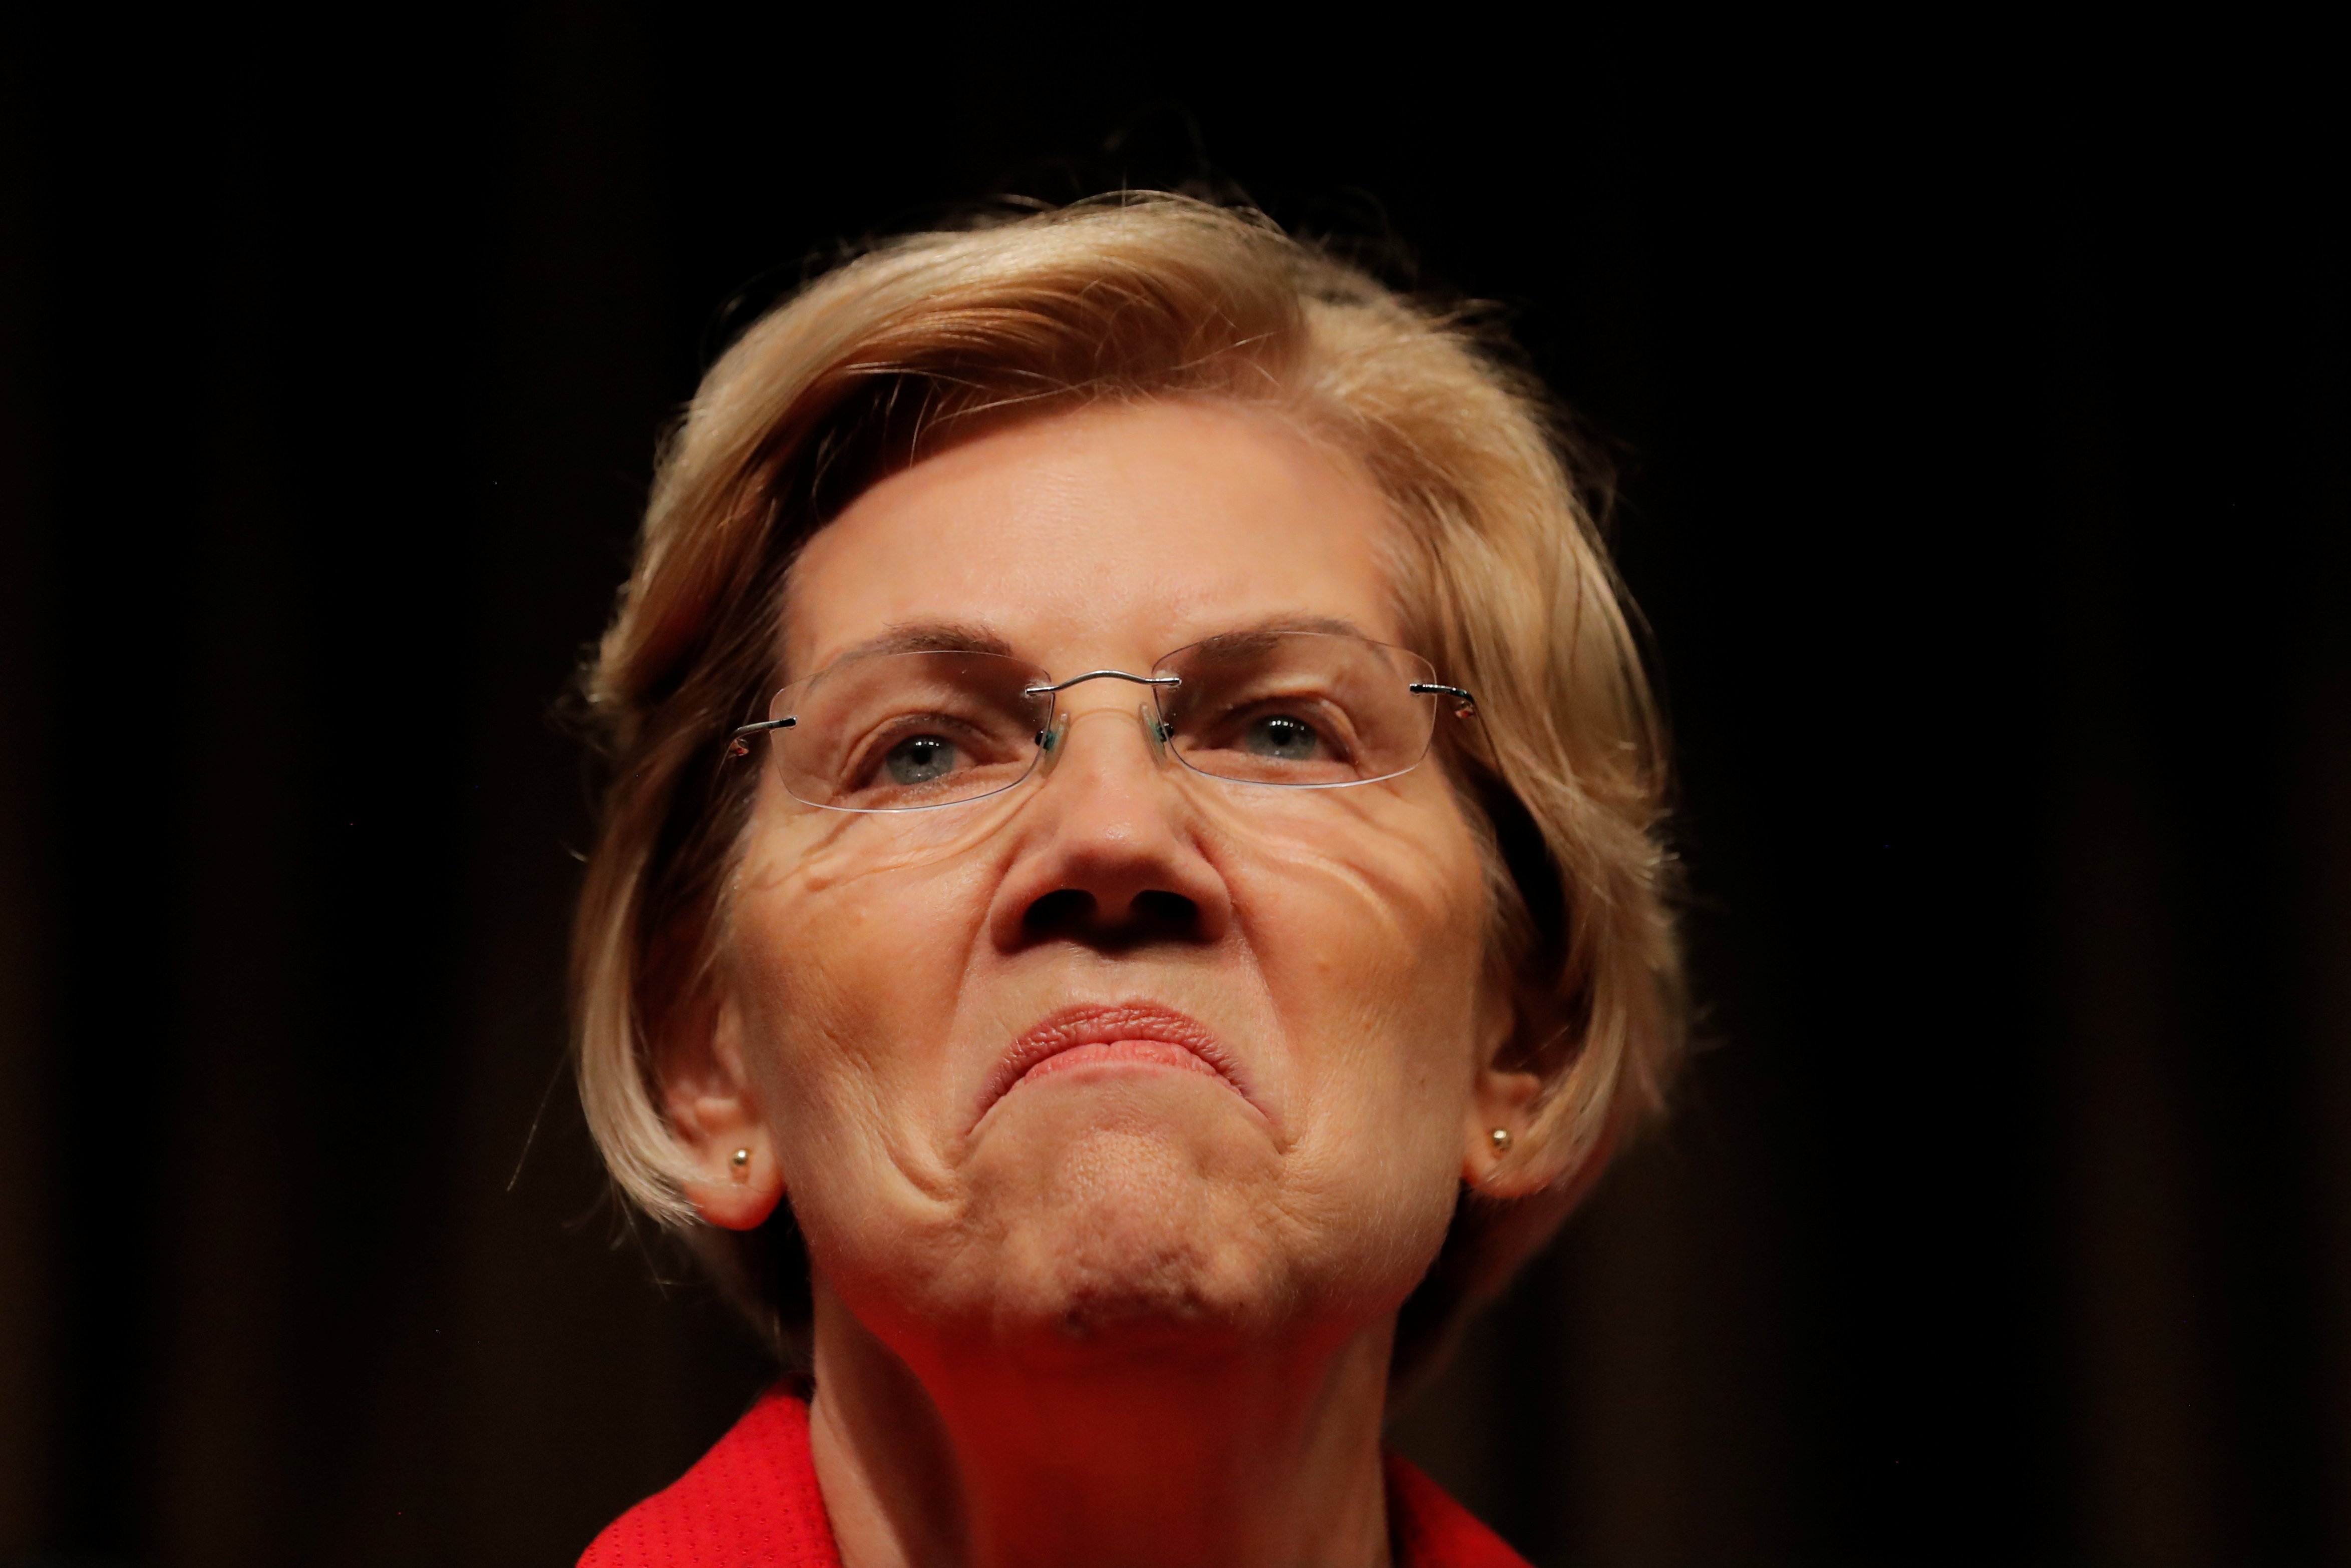 U.S. 2020 Democratic presidential candidate and U.S. Senator Elizabeth Warren (D-MA), speaks at the 2019 National Action Network National Convention in New York